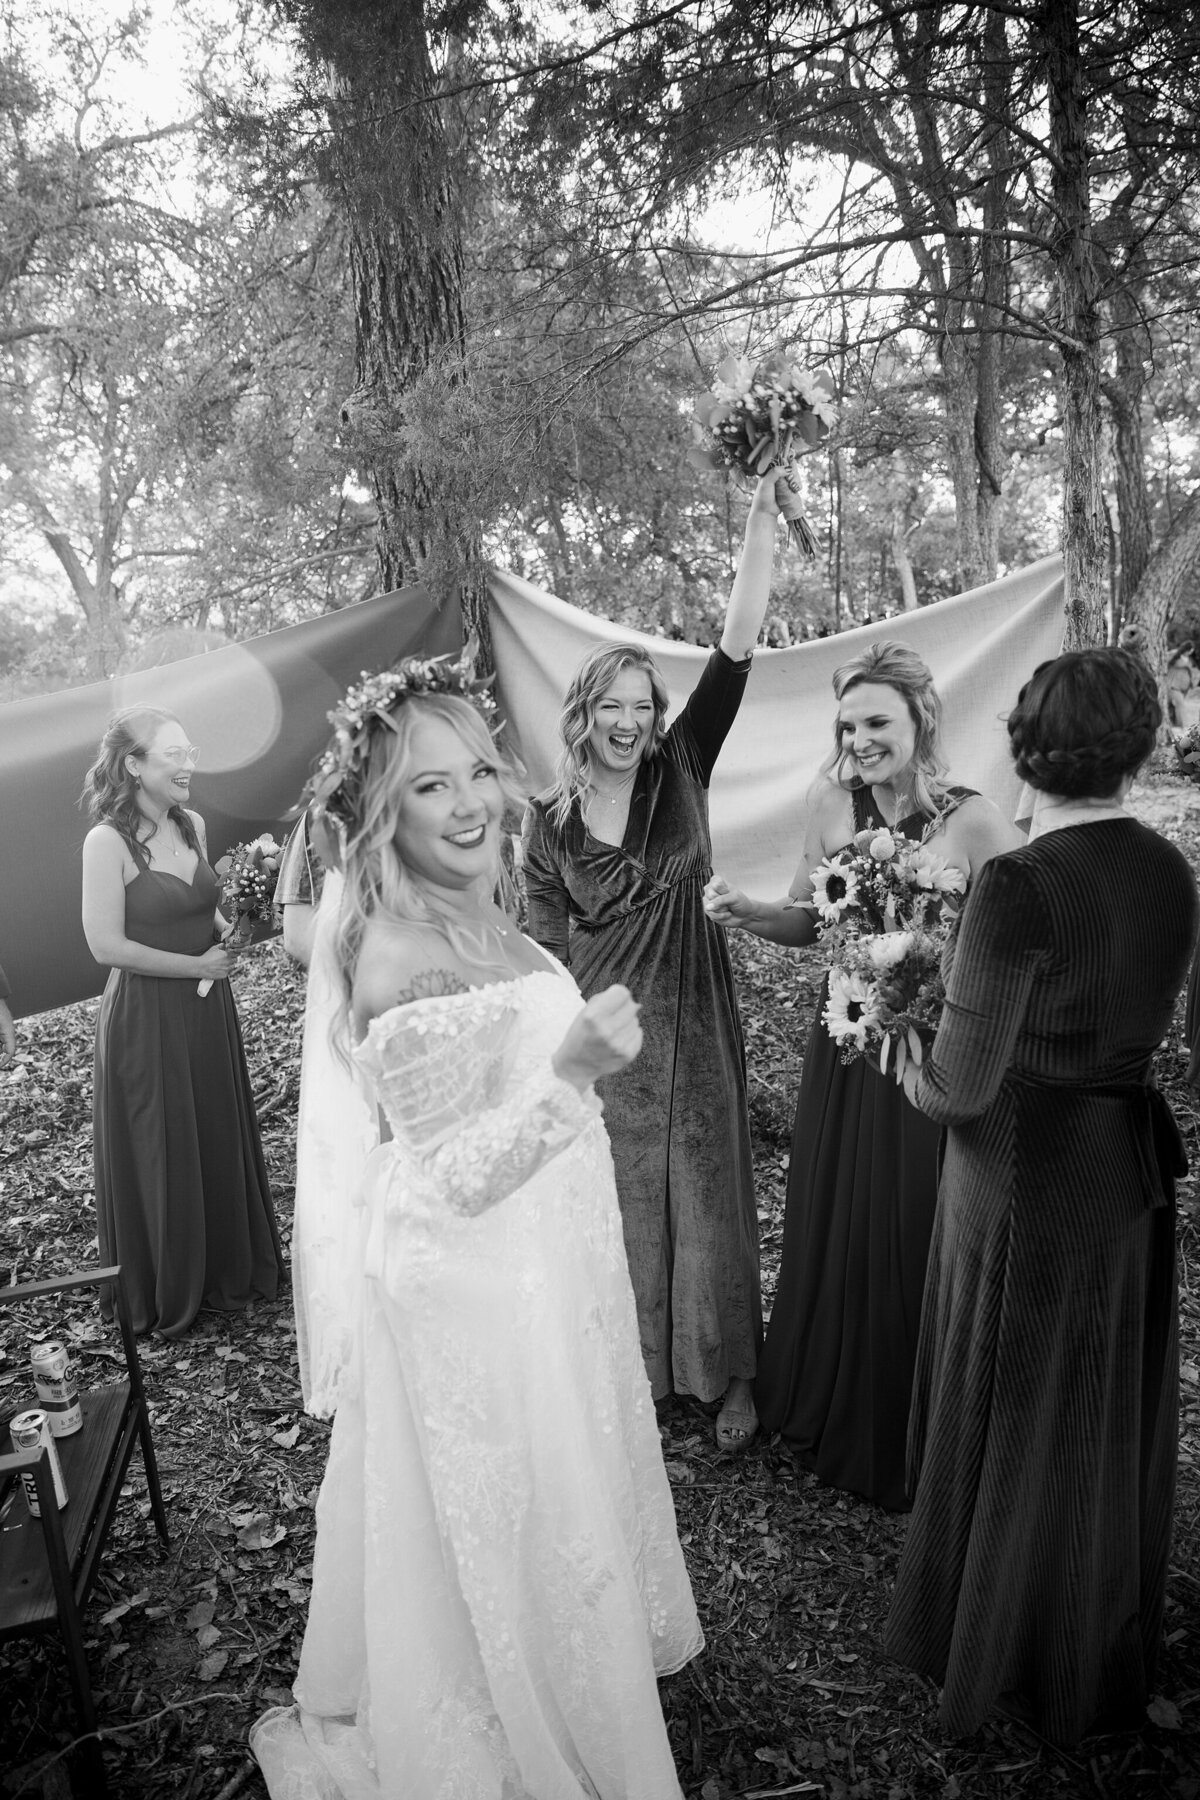 A black and white photo of a bride and her bridesmaids laughing, smiling, and celebrating behind a barrier right after a wedding ceremony in DFW, Texas.  the bride is wearing a long, flowing white dress with a flower crown while her bridesmaids are all wearing dark dresses and holding bouquets.